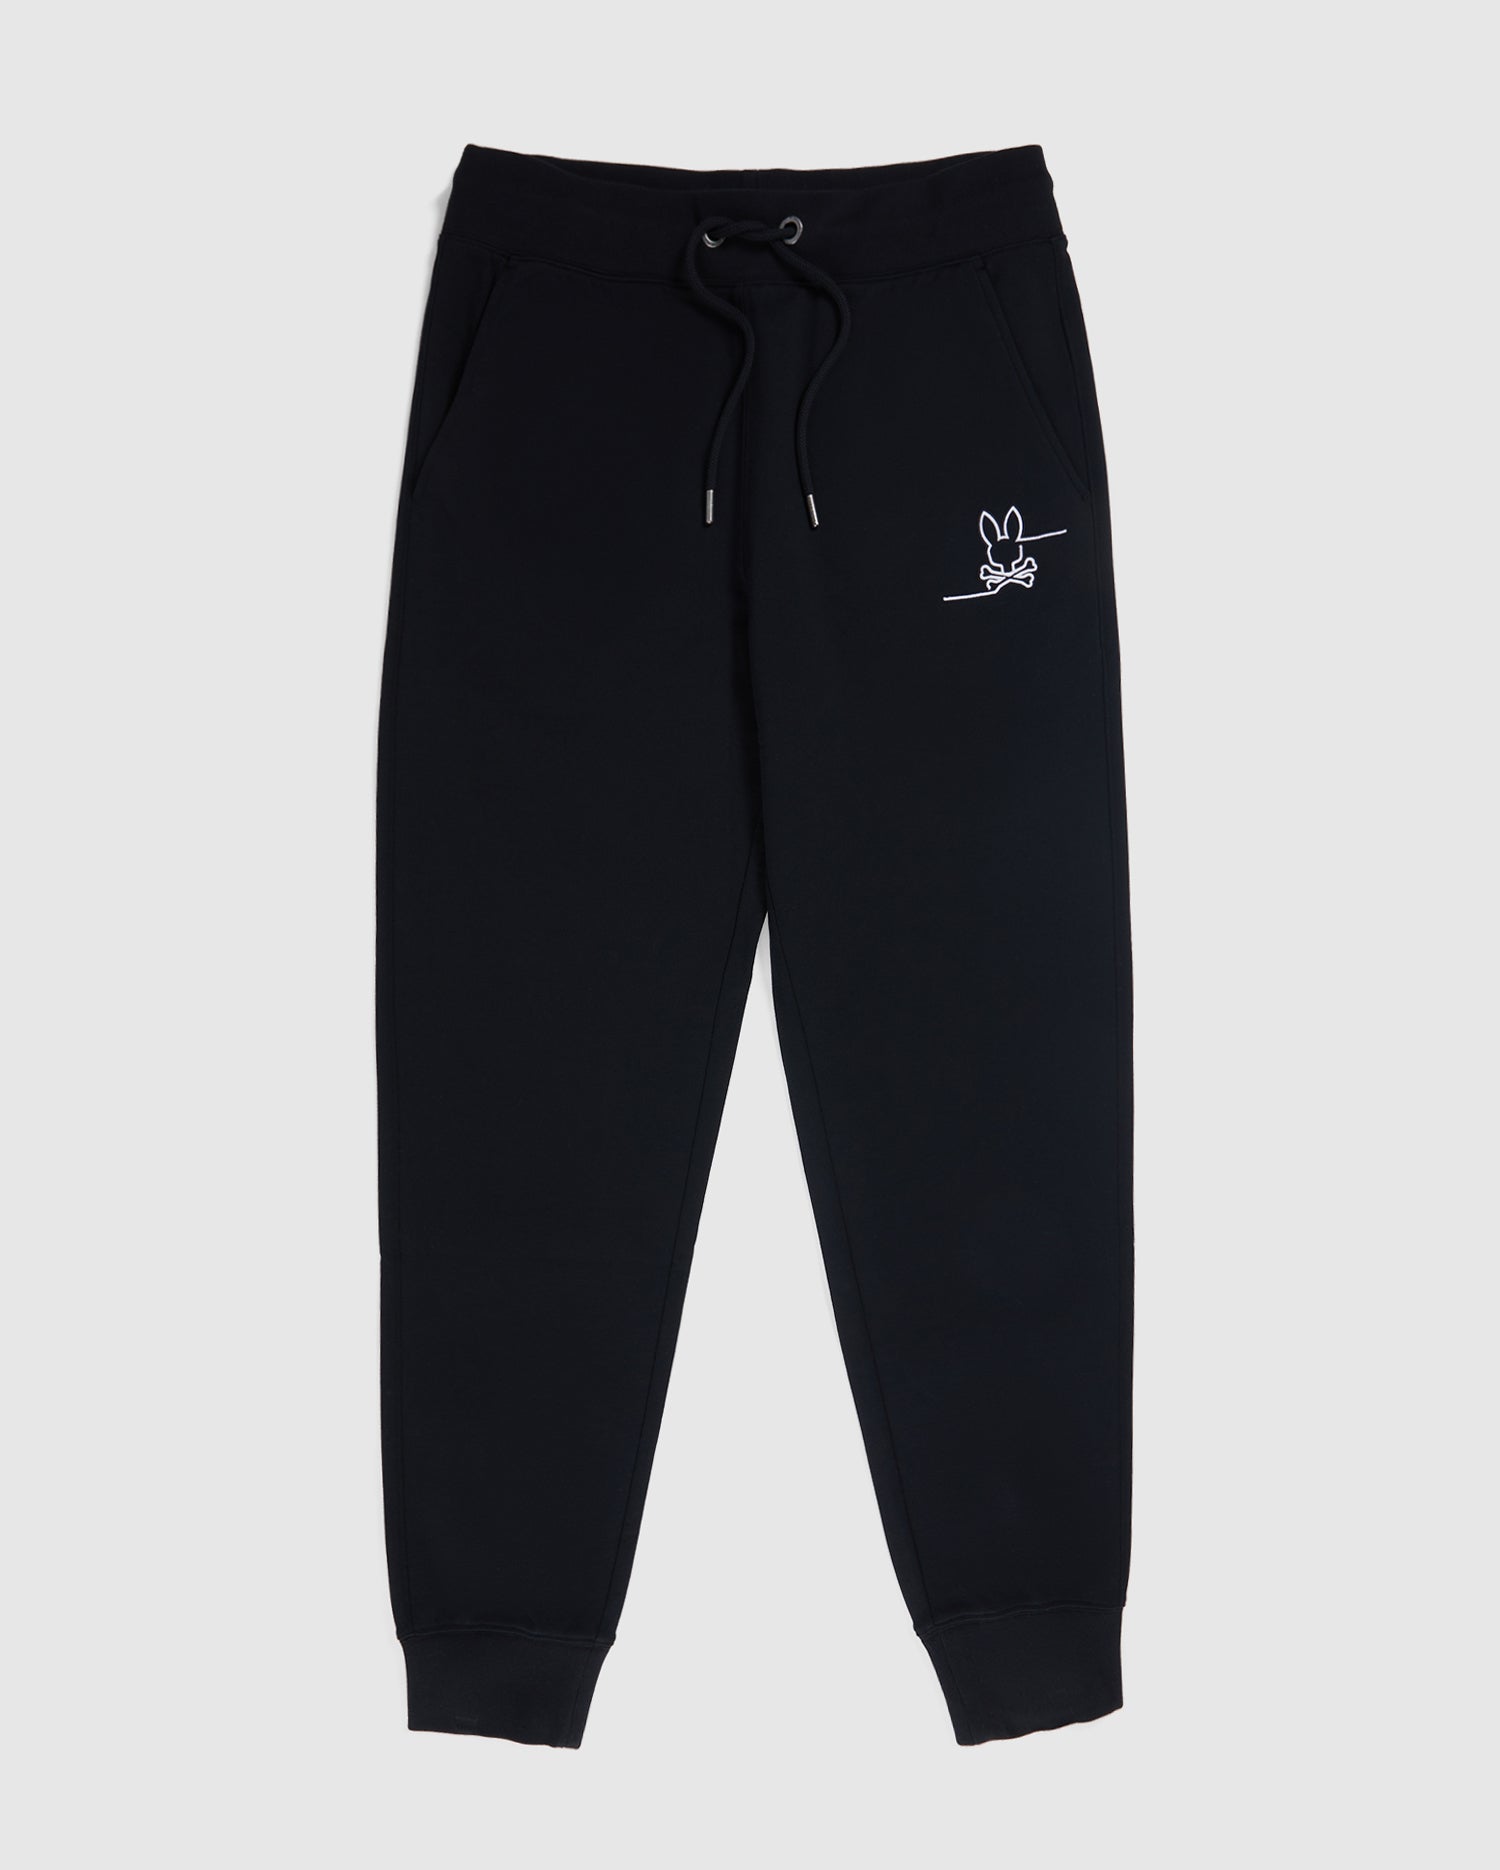 MENS BLACK CHESTER EMBROIDERED SWEATPANT